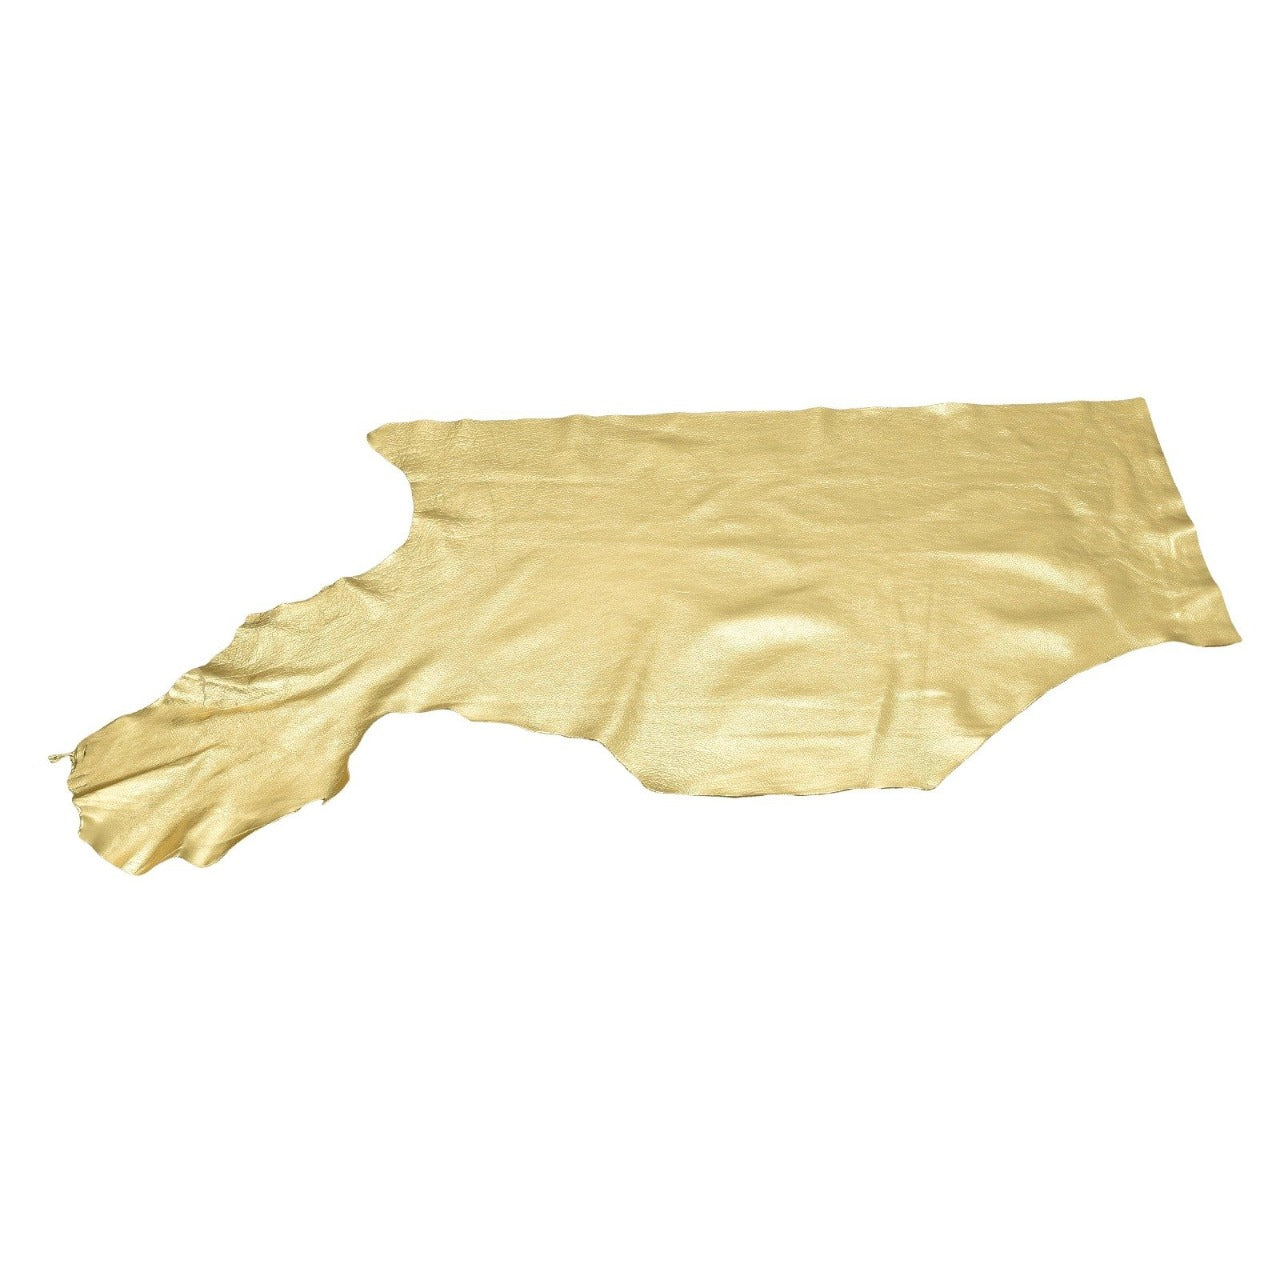 Gold Dust Metallic Vegas 2-3 oz Leather Cow Hides, 6.5-7.5 Sq Ft / Project Piece (Bottom) | The Leather Guy